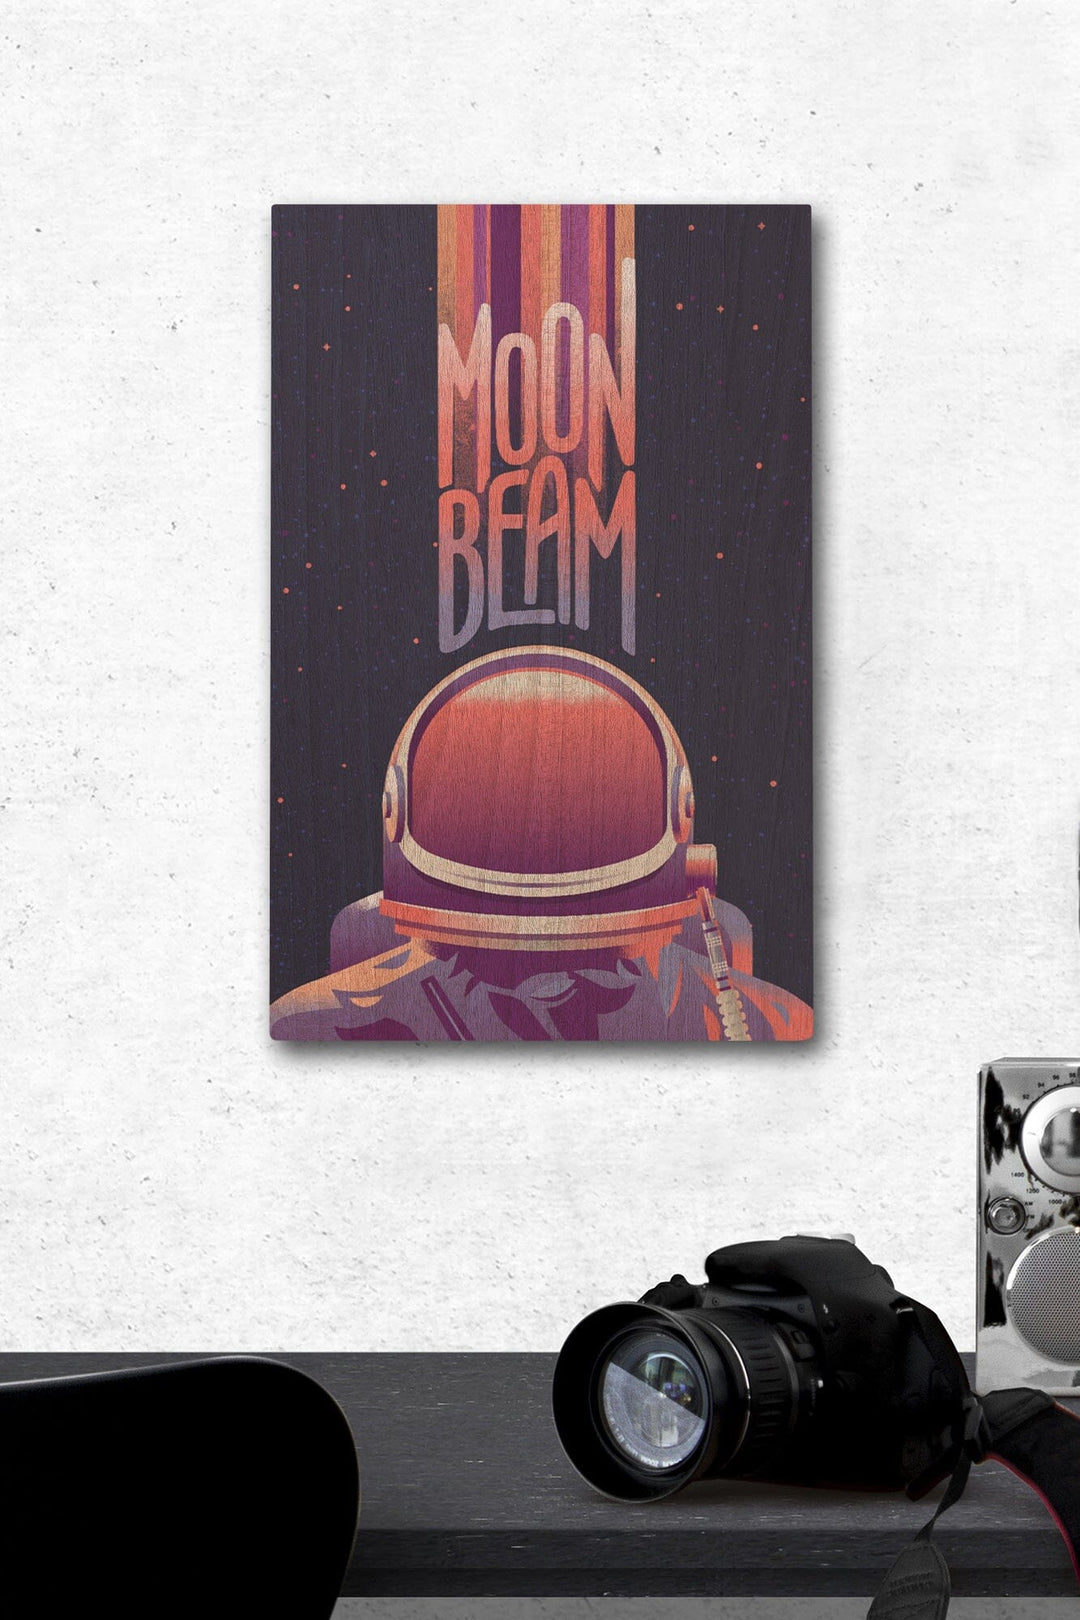 Spacethusiasm Collection, Astronaut, Moon Beam, Wood Signs and Postcards Wood Lantern Press 12 x 18 Wood Gallery Print 